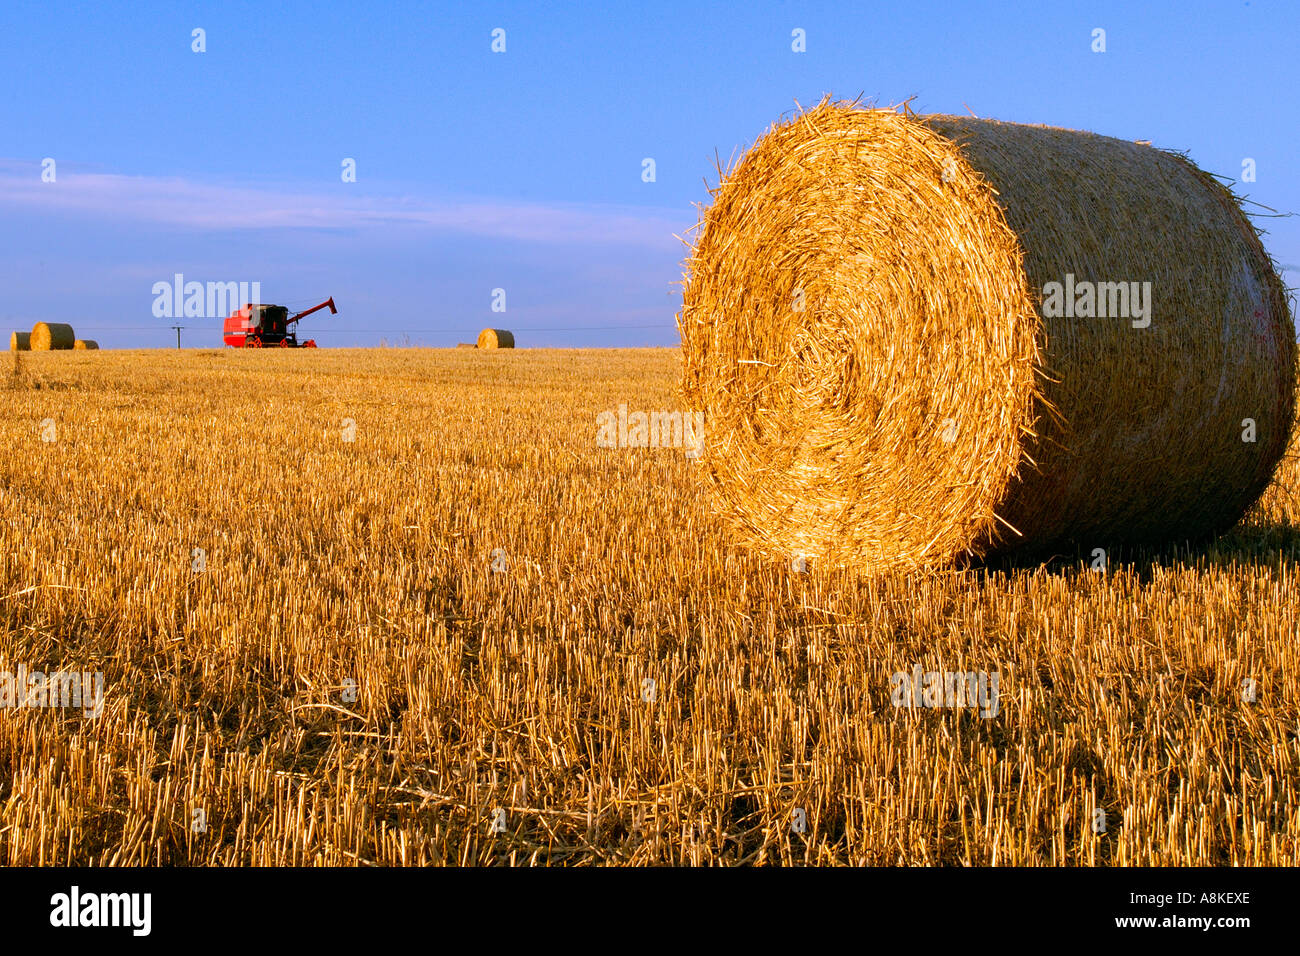 Harvested field under a blue sky scattered with hay bales and a bright red combine harvester on the horizon Stock Photo